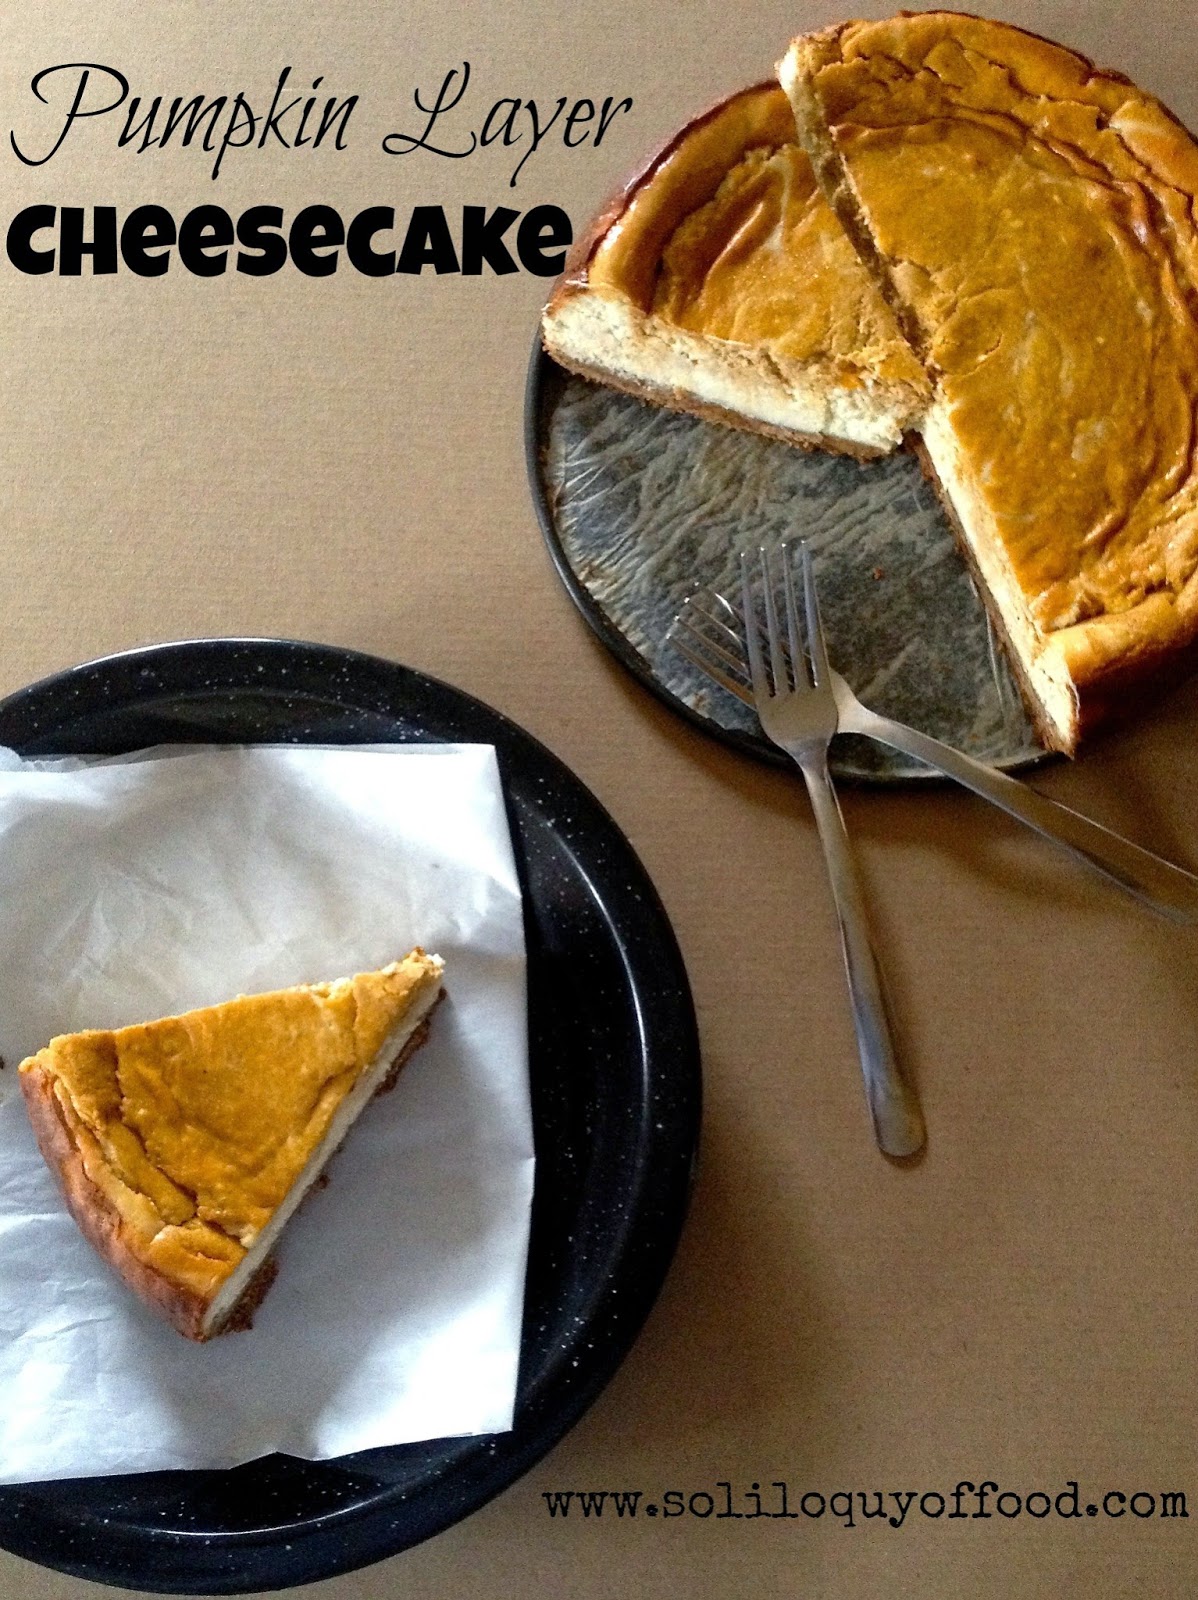 Pumpkin Layer Cheesecake - Contributor post from Kim at www.soliloquyoffood.com